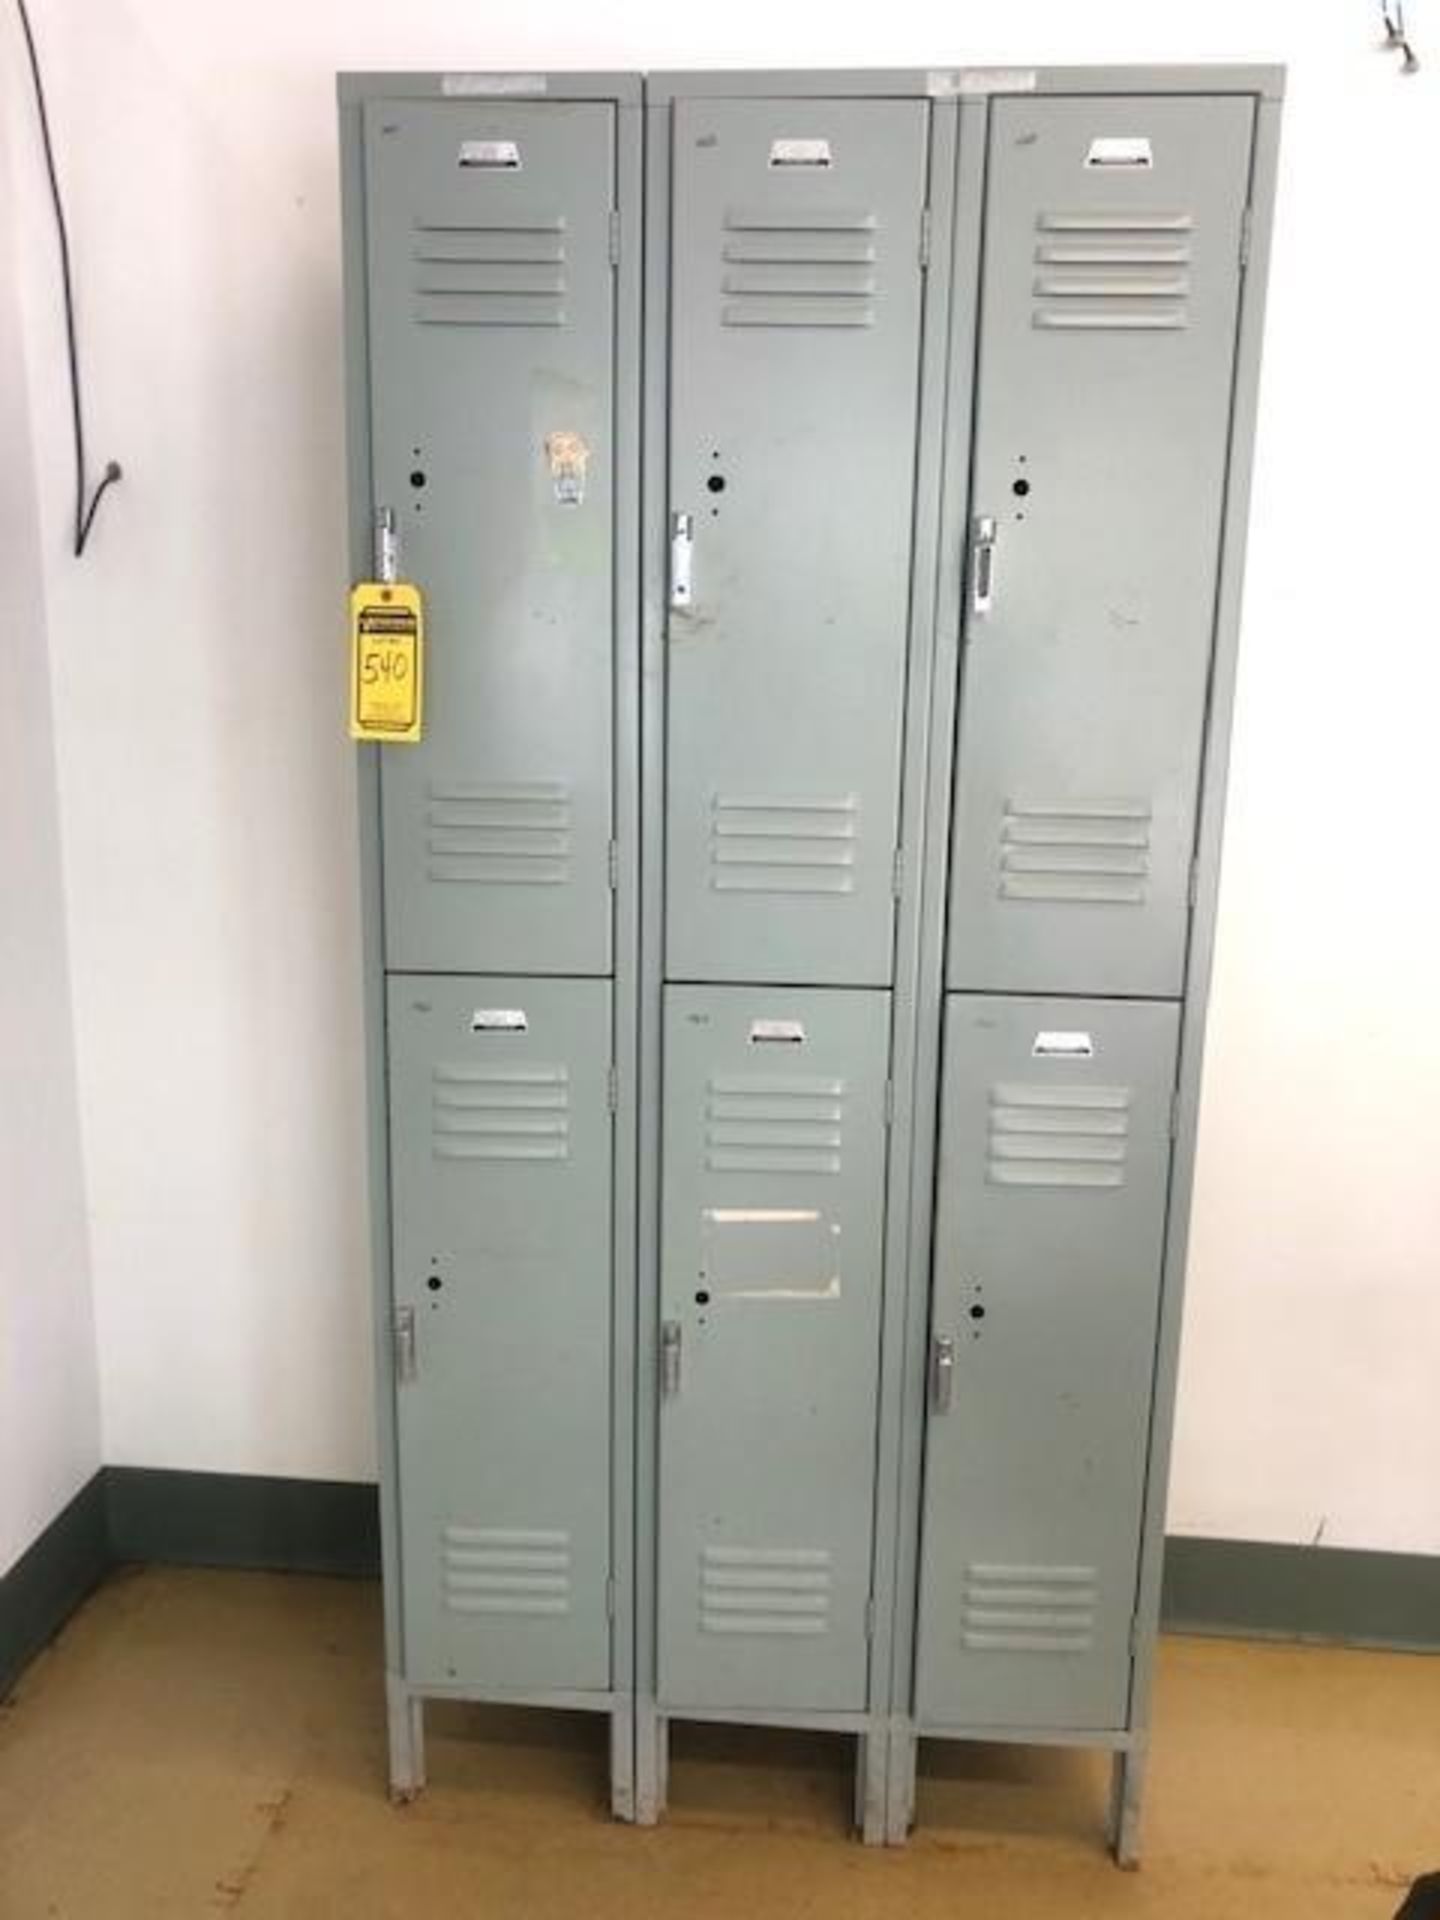 (4) SECTIONS OF LOCKERS - Image 4 of 4